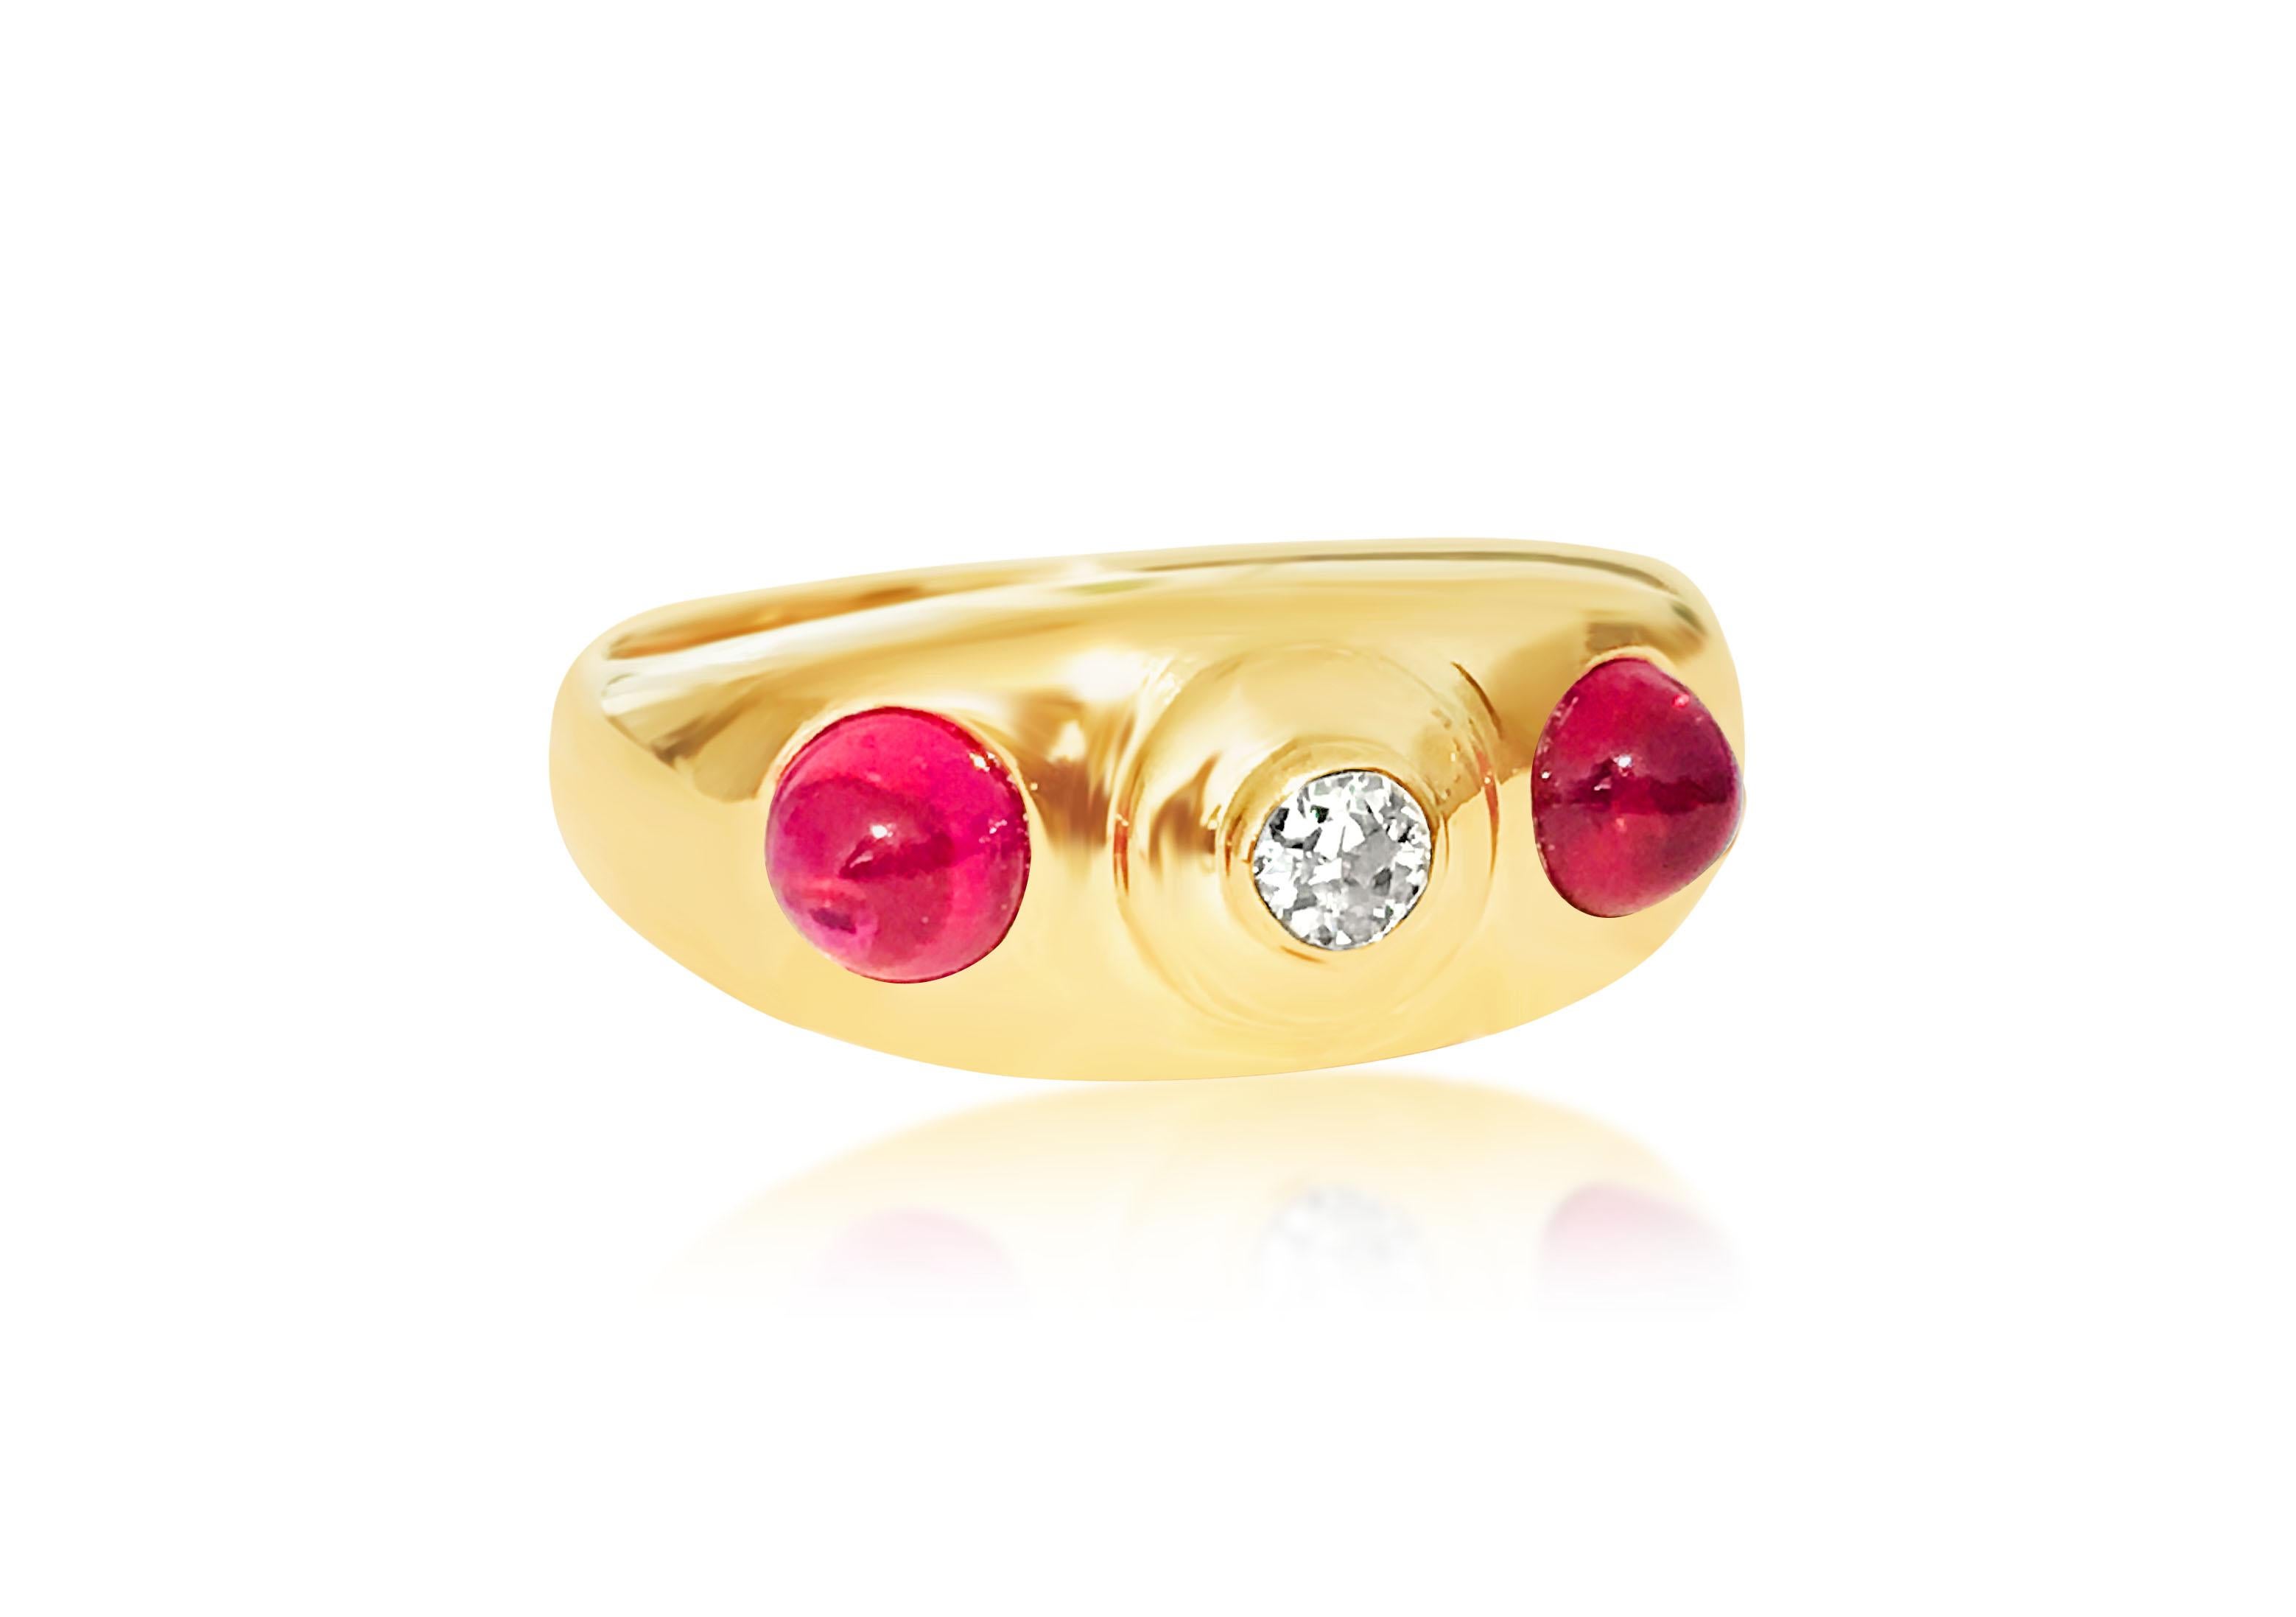 Indulge in the allure of this 14-karat yellow gold ring, showcasing a 0.50-carat natural earth-mined Burma ruby in a smooth cabochon cut, elegantly set in a bezel. Adorned with a center diamond of 0.27 carats, featuring VS-SI clarity and G color in